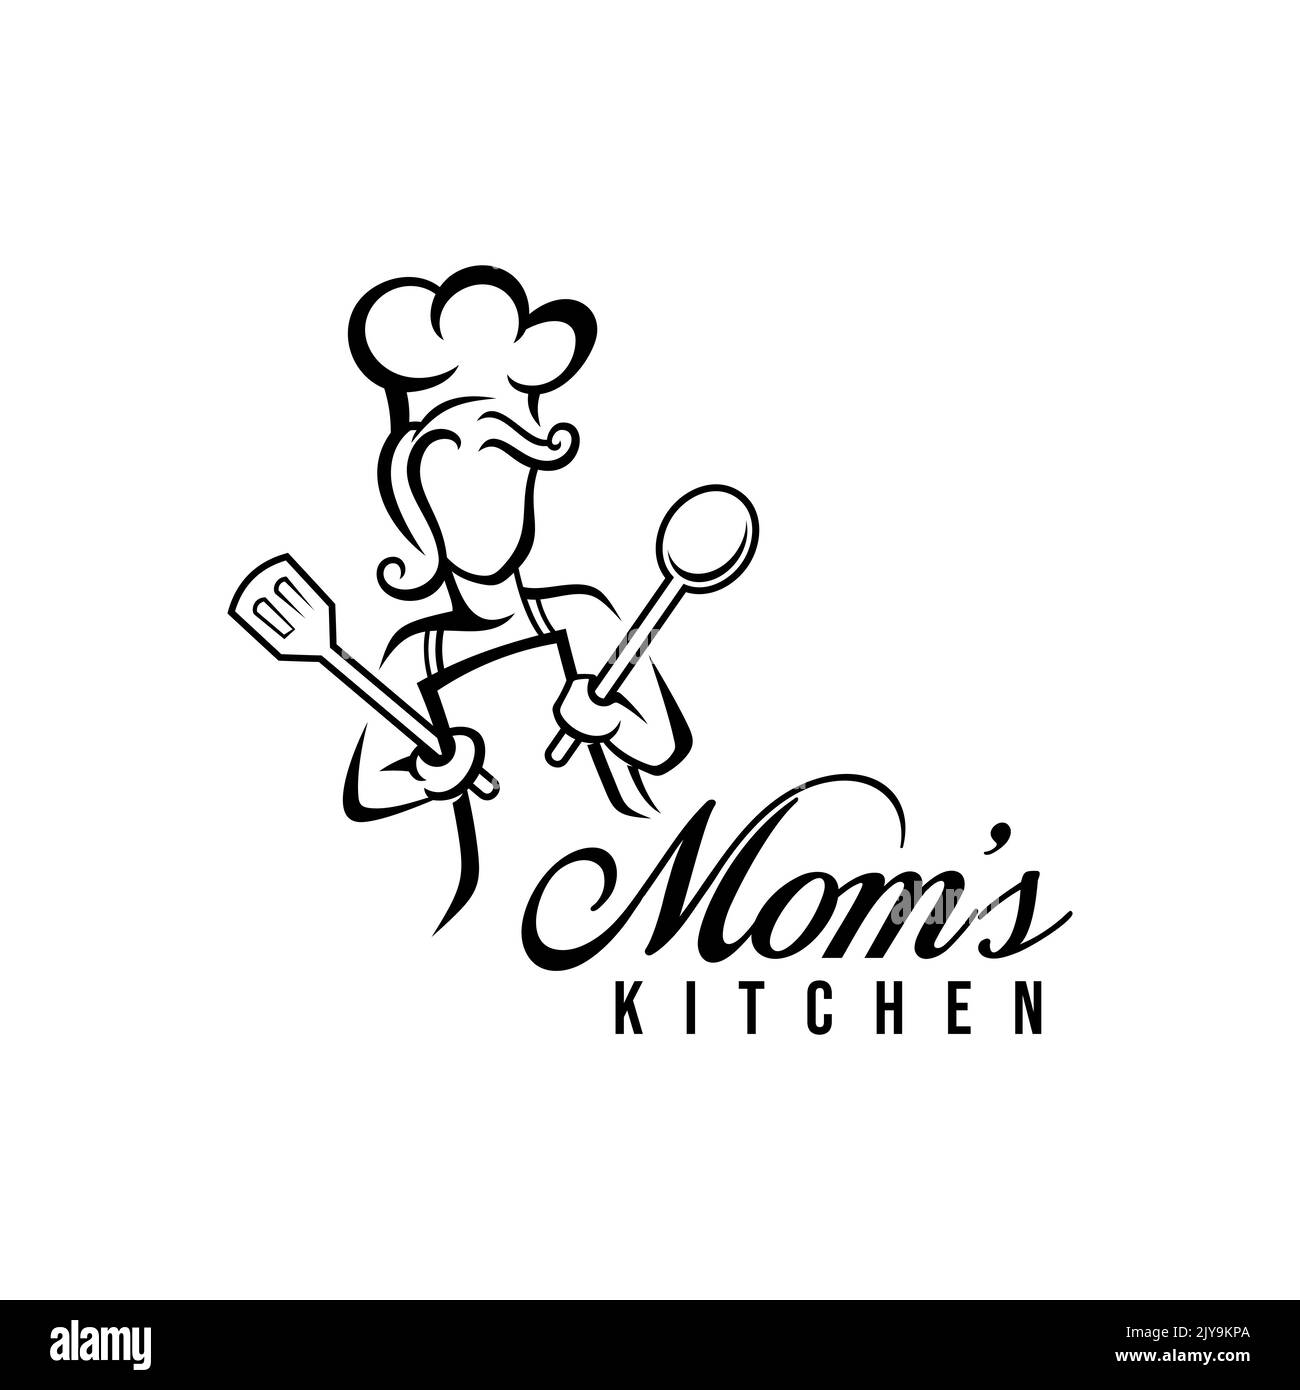 Mom Kitchen Logo Vector Illustration With Modern Typography Chef Mascot Logo Stock Vector Image 